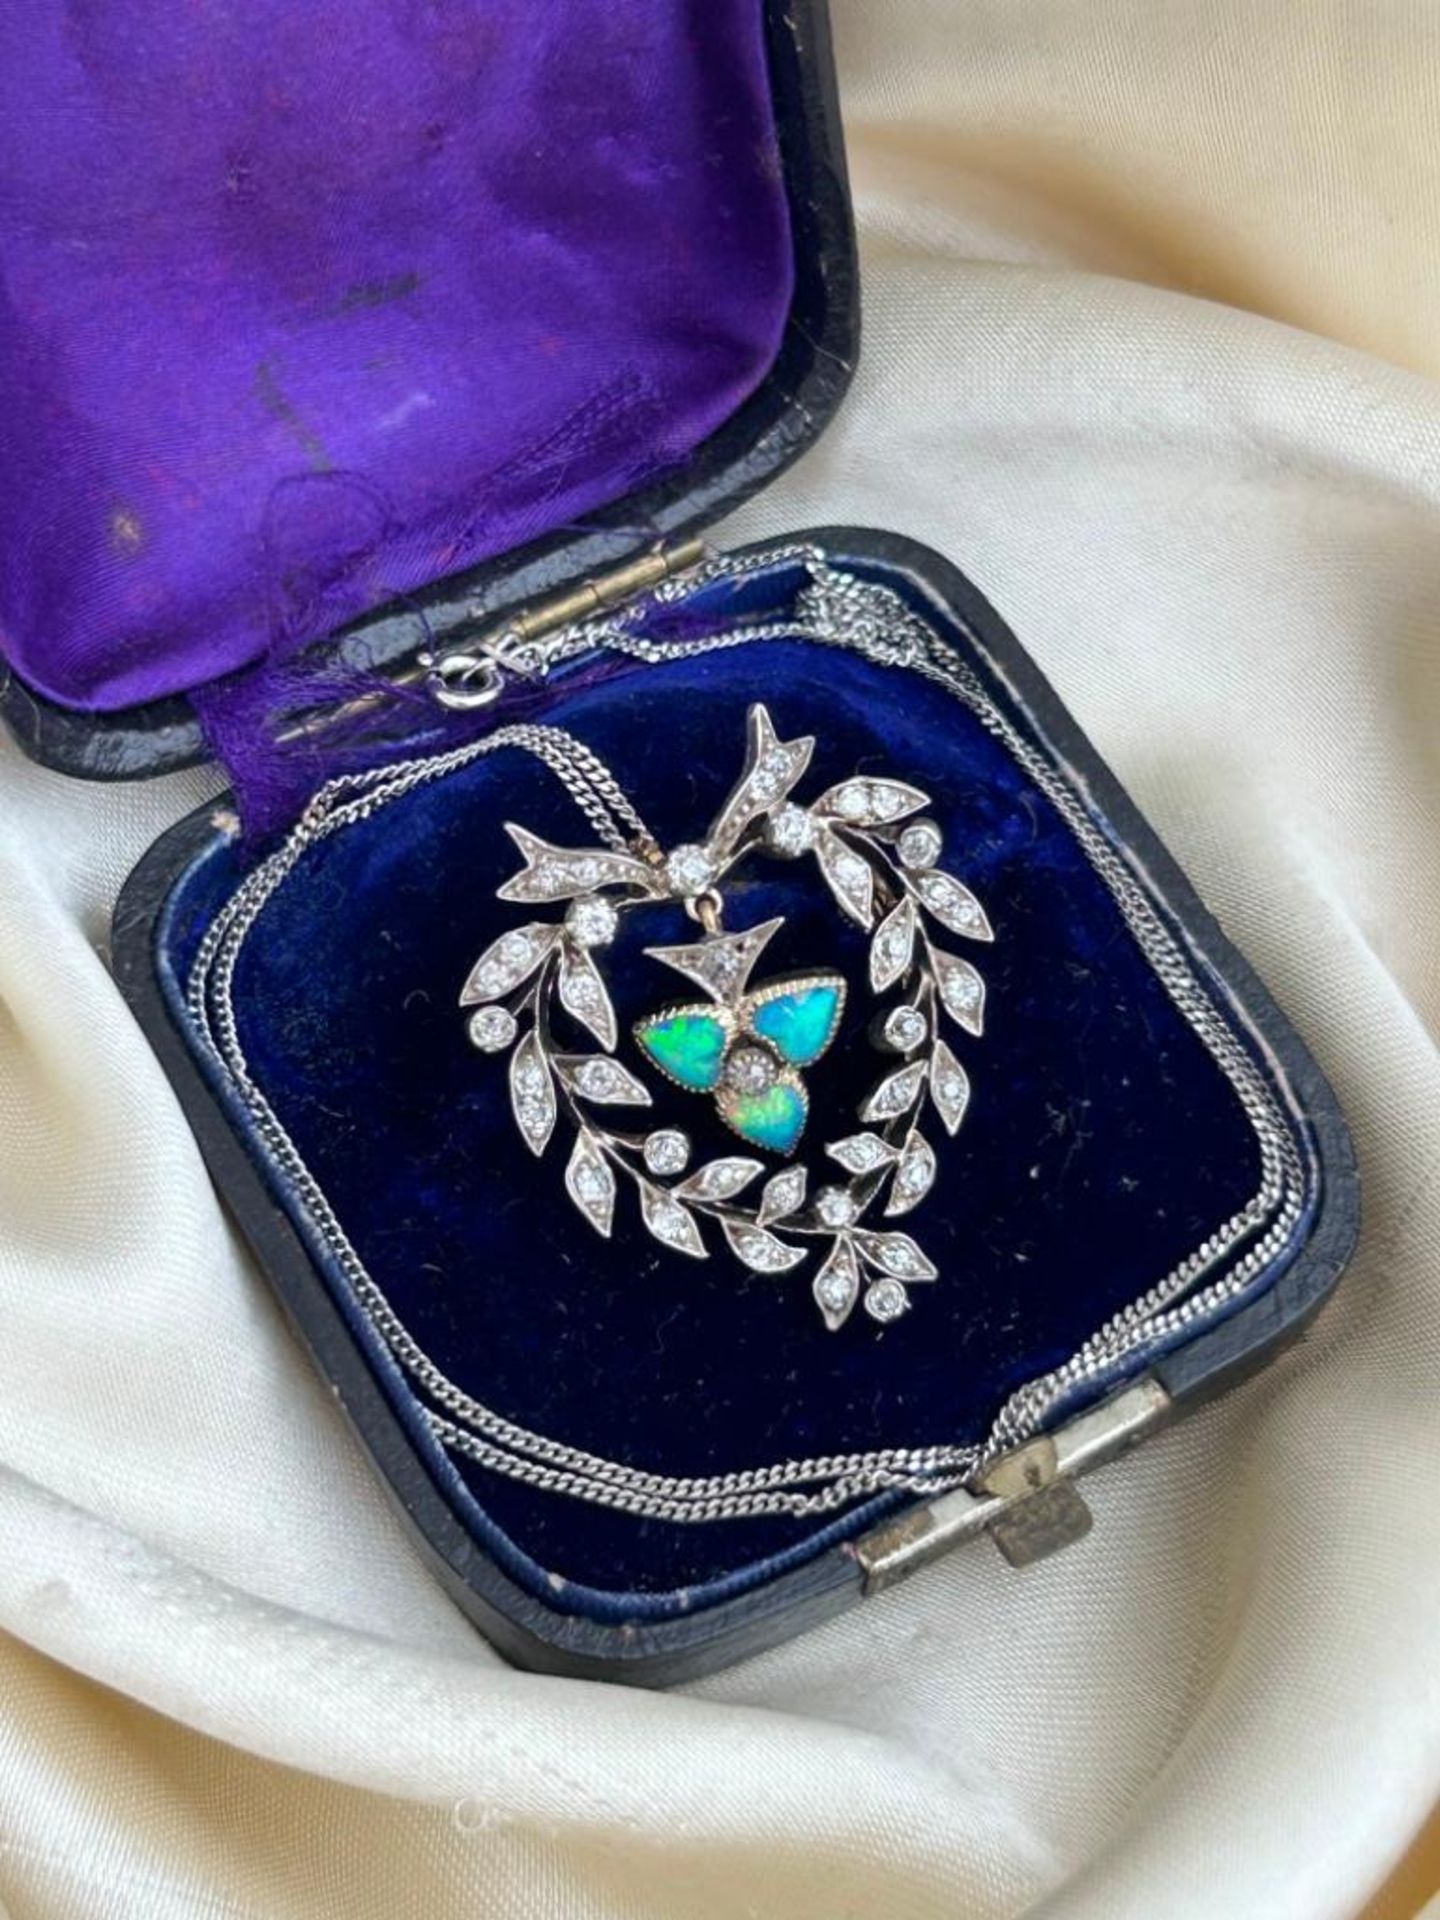 Incredible Antique Opal and Diamond Pendant on Platinum Chain in Original Fitted Box - Image 4 of 11